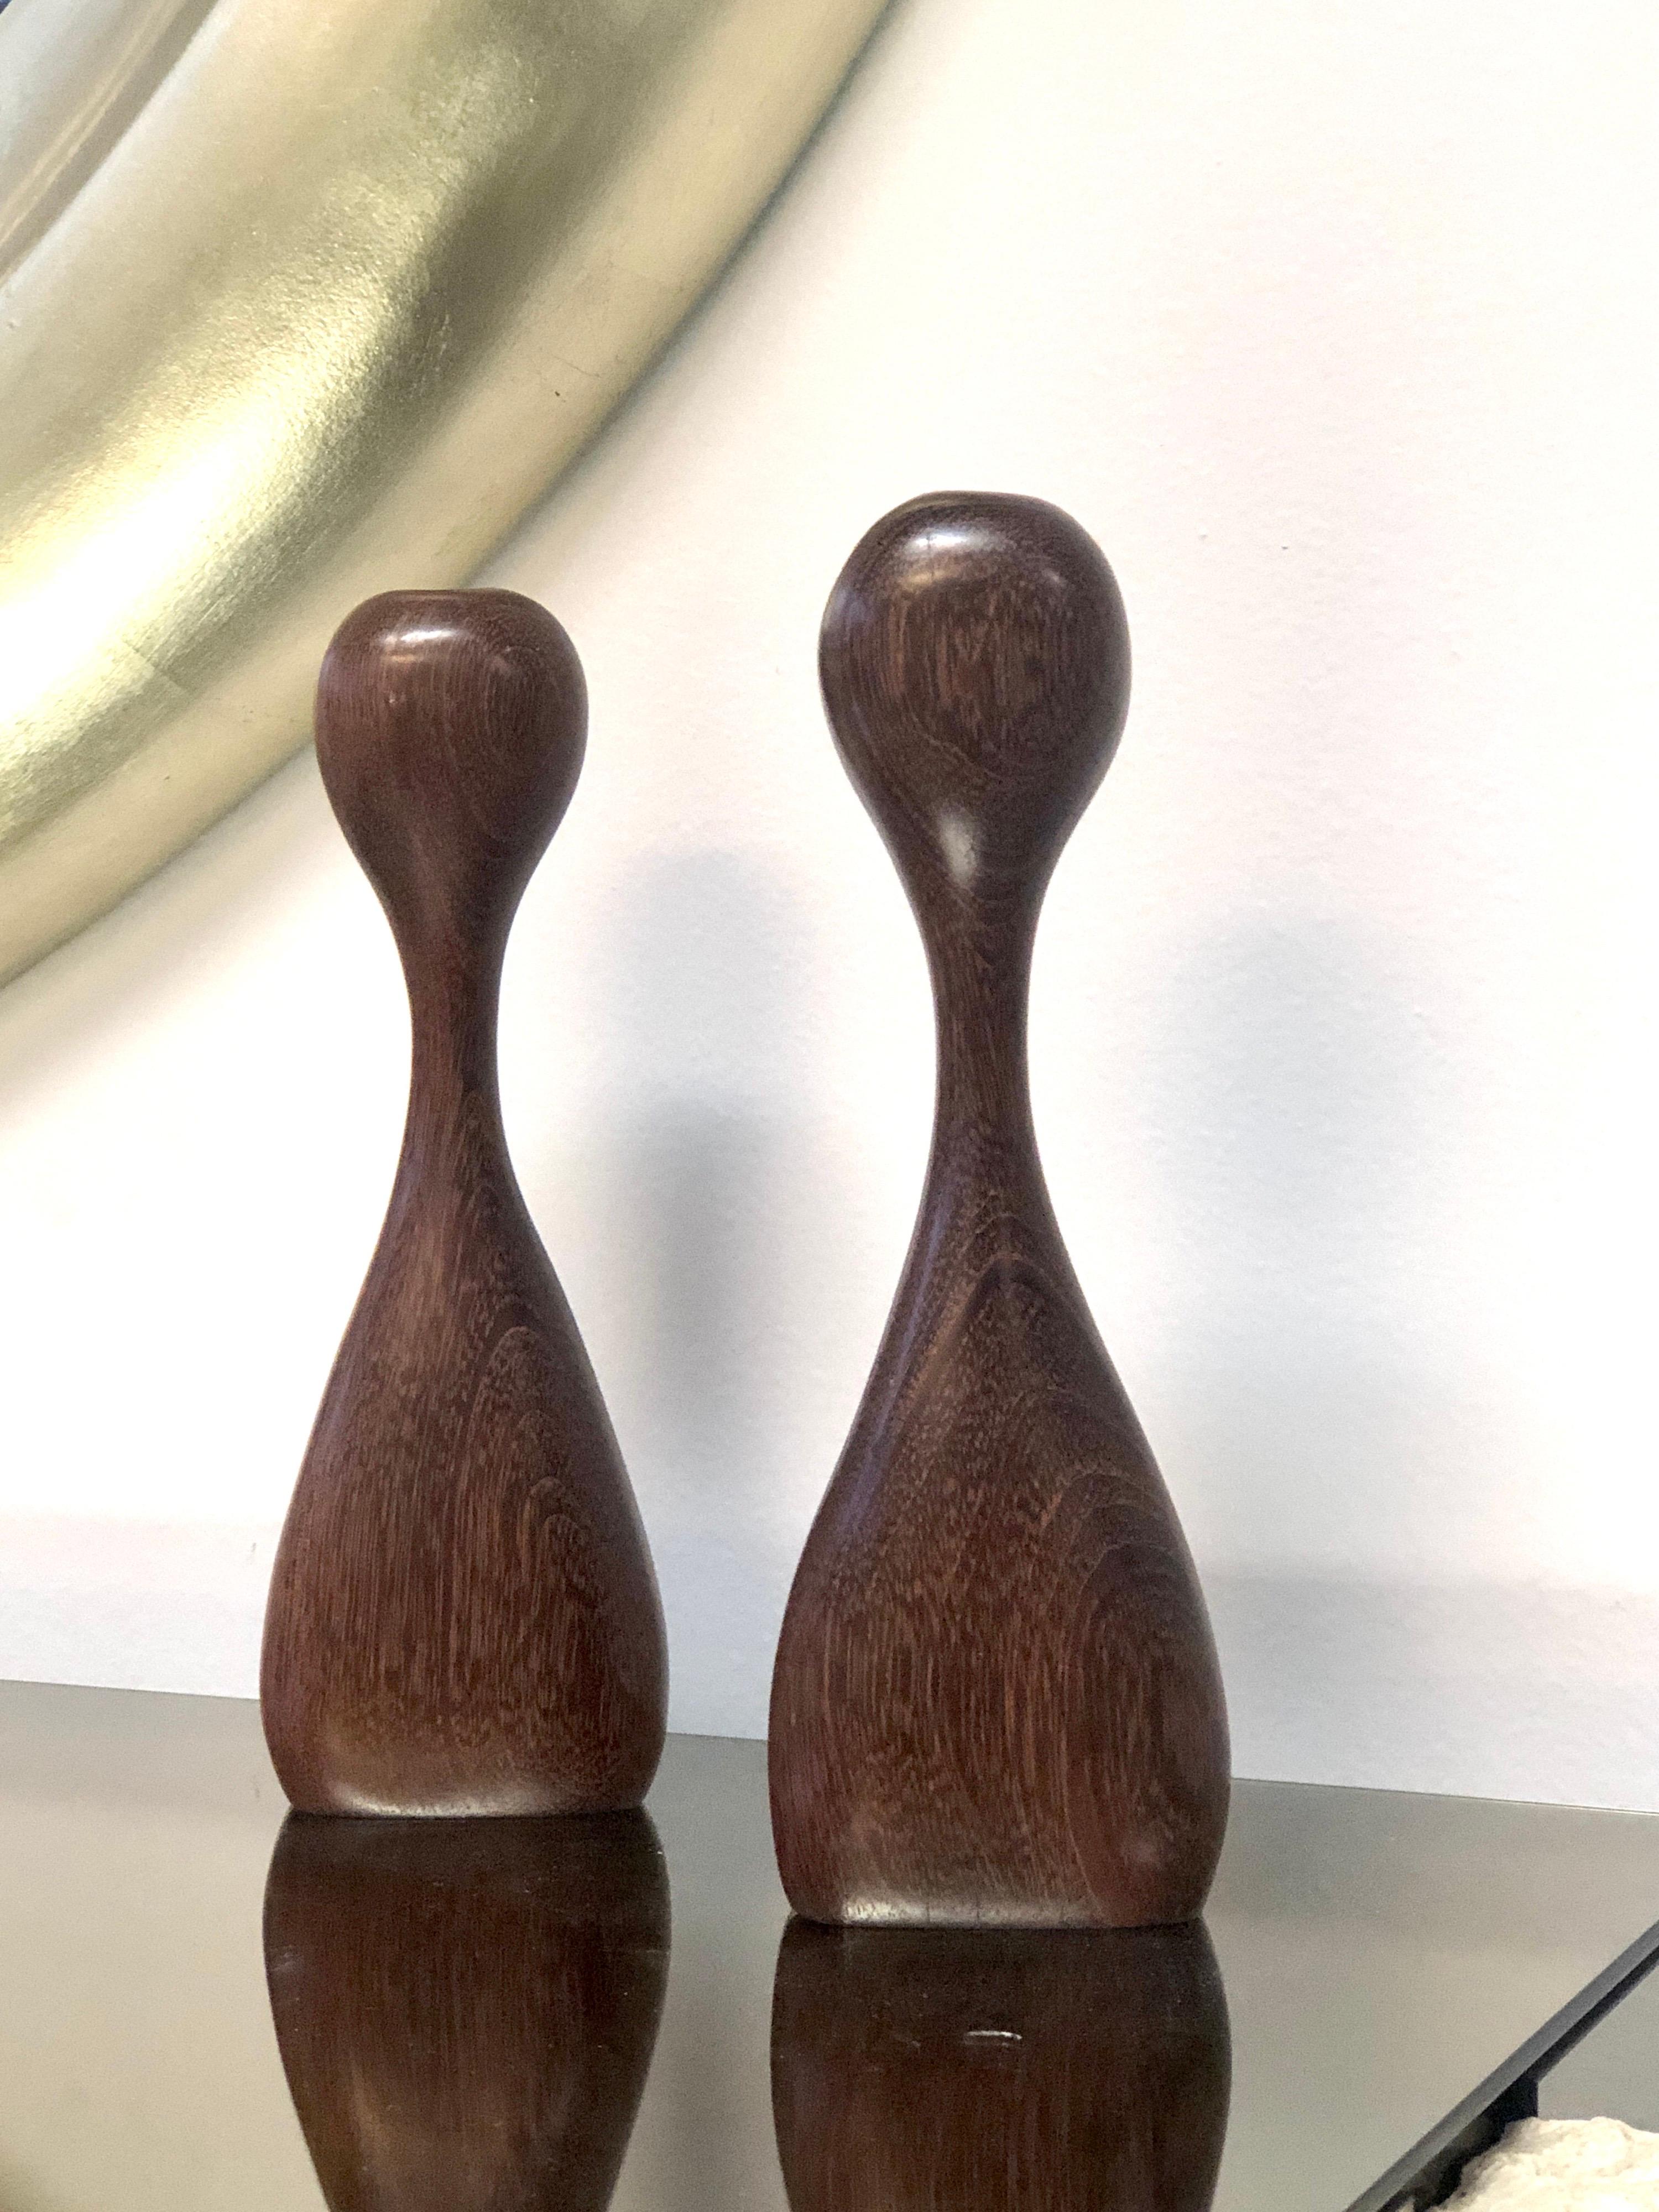 A pair of sculptural candleholders. Done in an organic style, seemingly identical, with subtle but noticeable differences that can only be achieved by a master sculptor. Tallest is 11.5”, the second one is 11”.